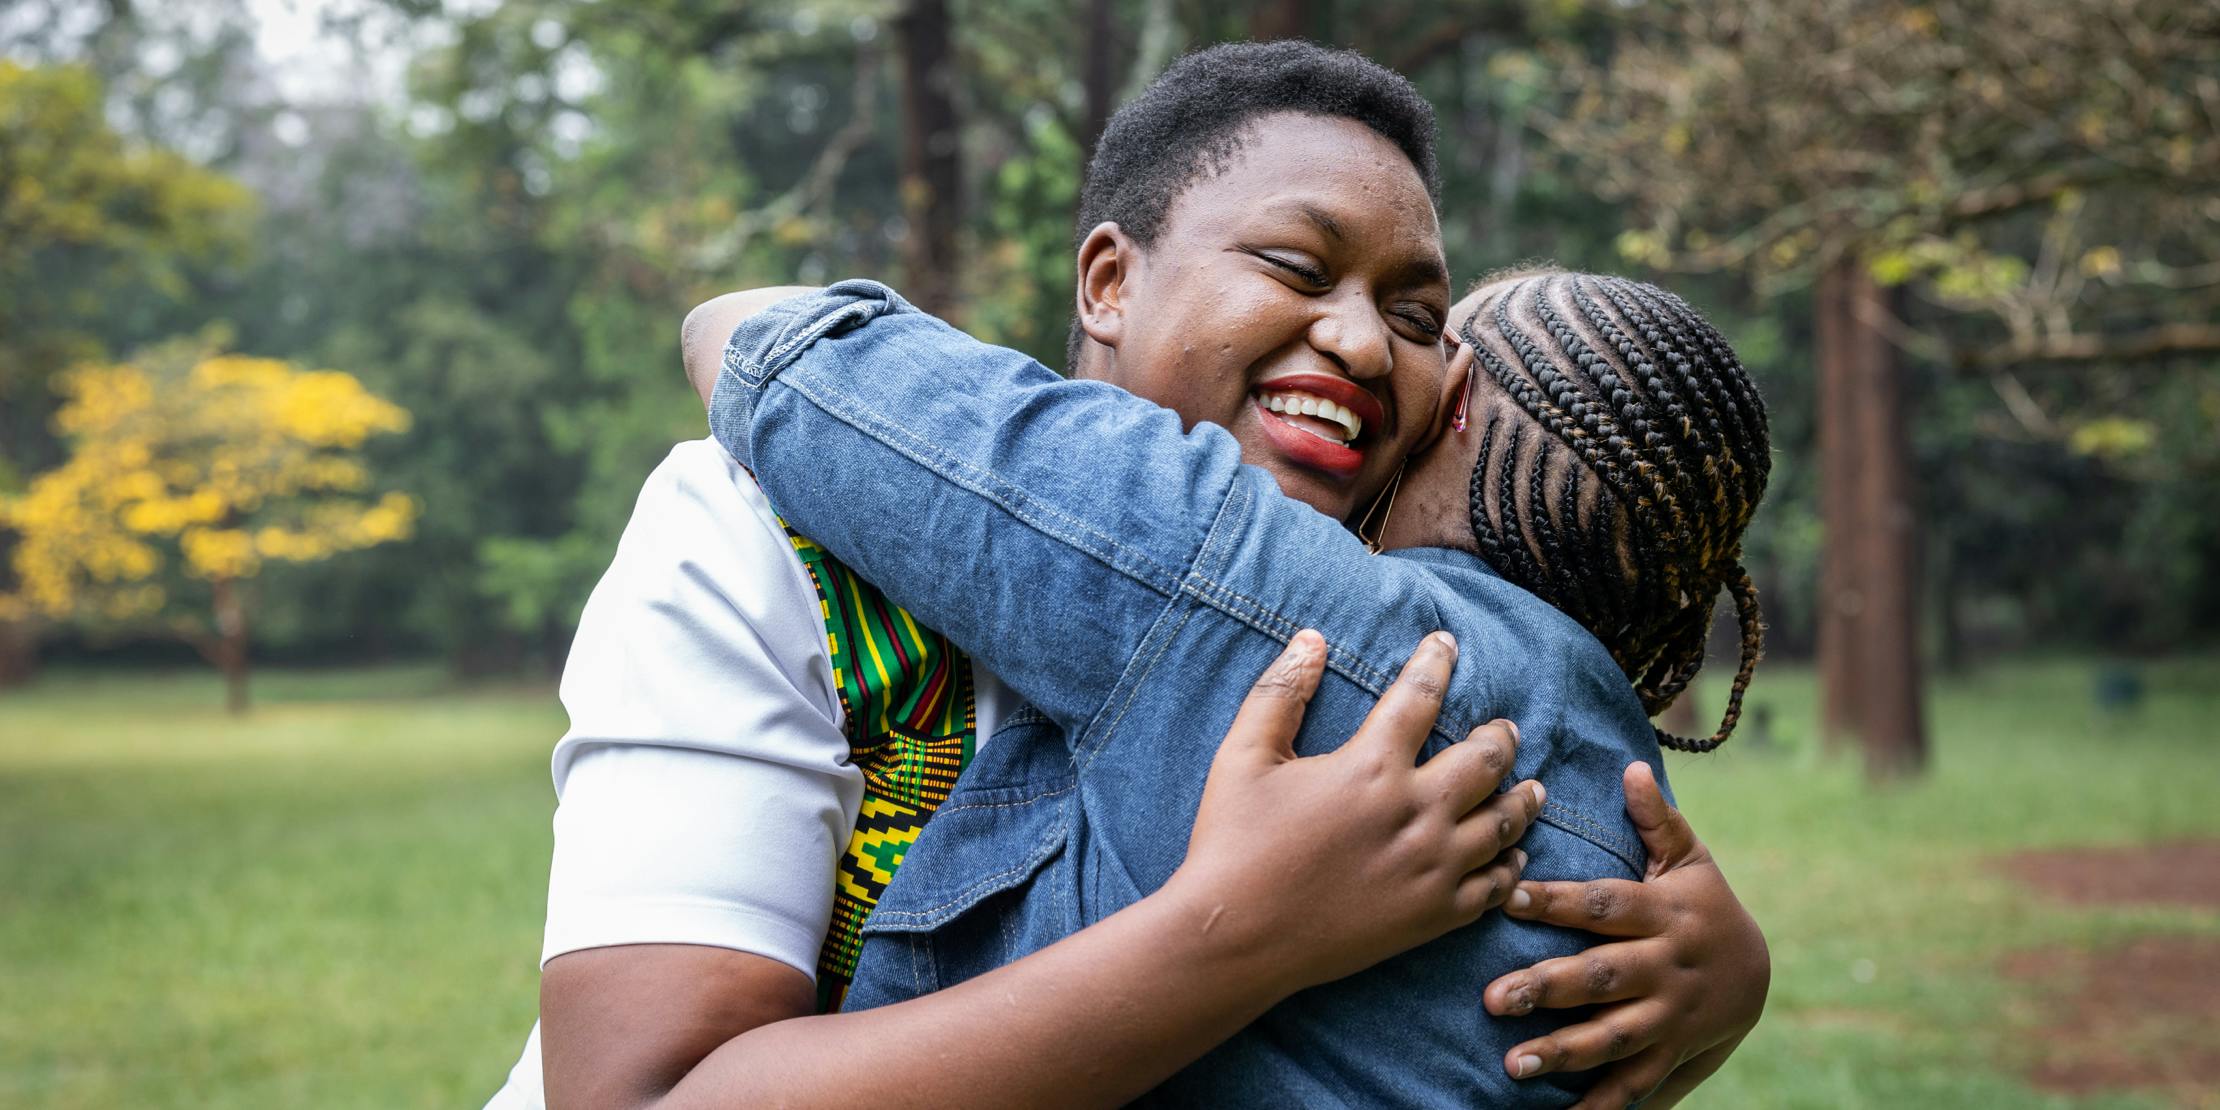 Young woman living with HIV photographed with her friend in Nairobi, Kenya